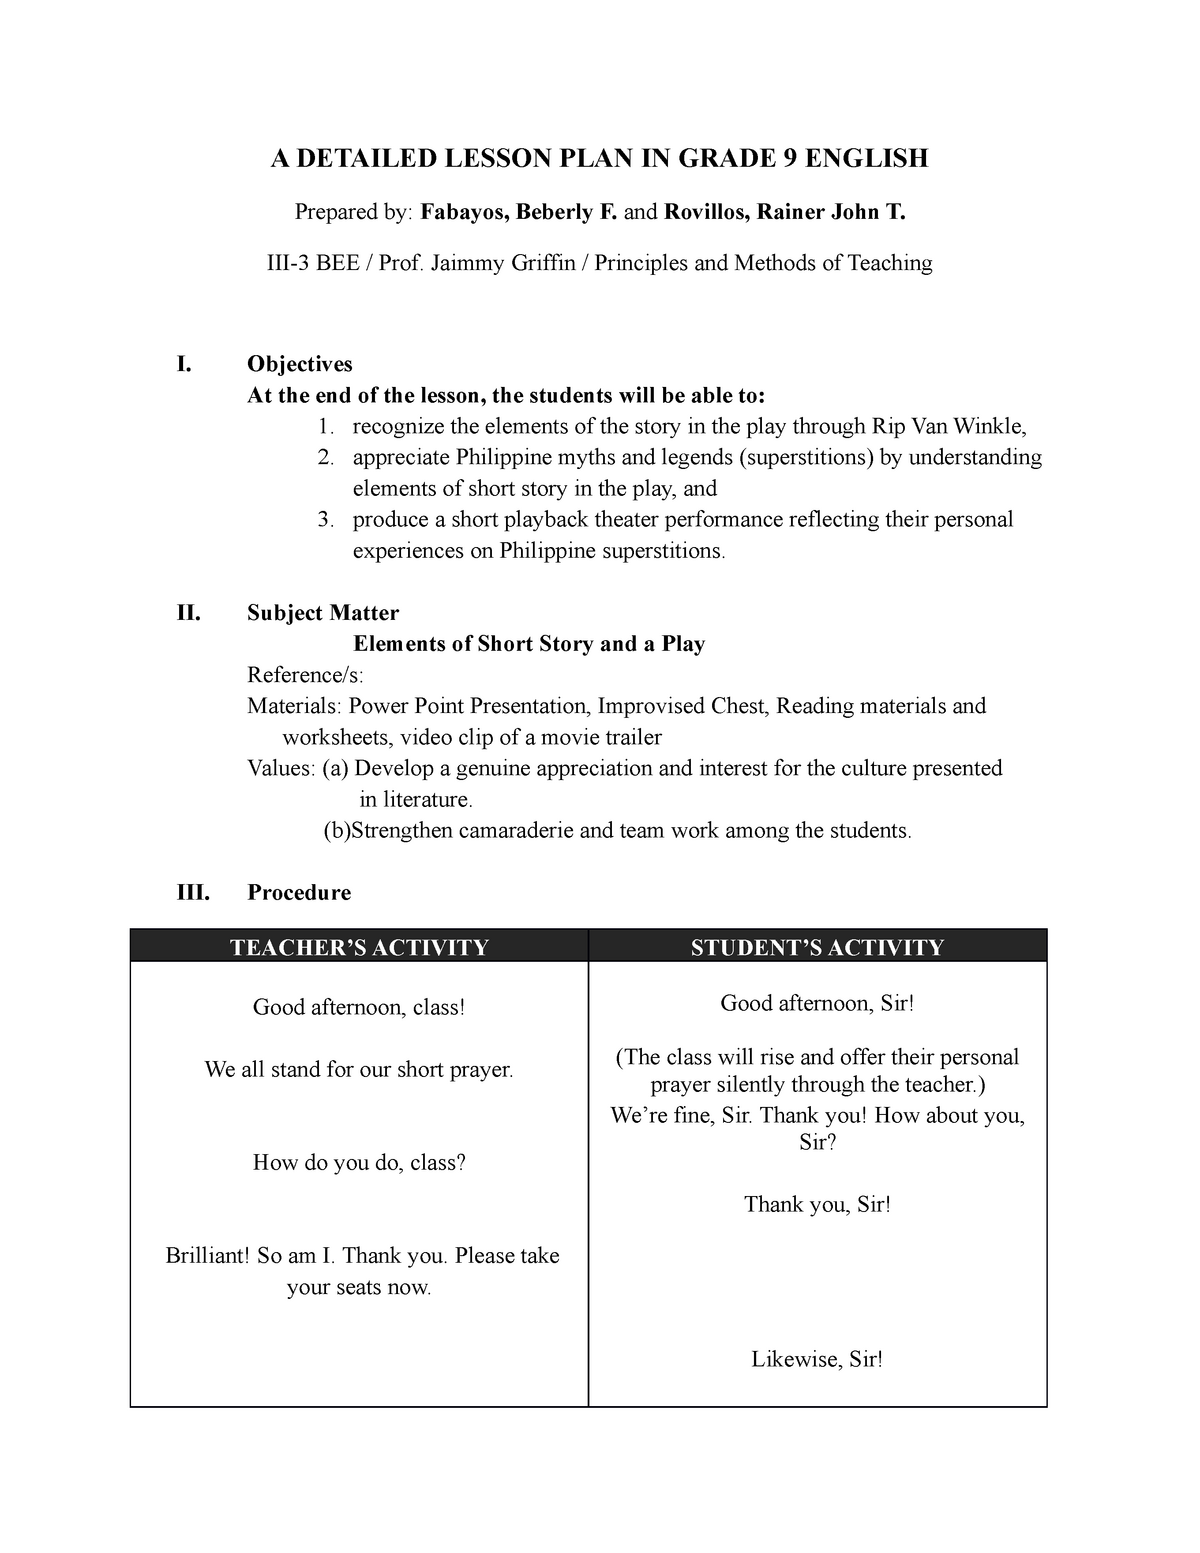 a-detailed-lesson-plan-in-grade-9-englis-a-detailed-lesson-plan-in